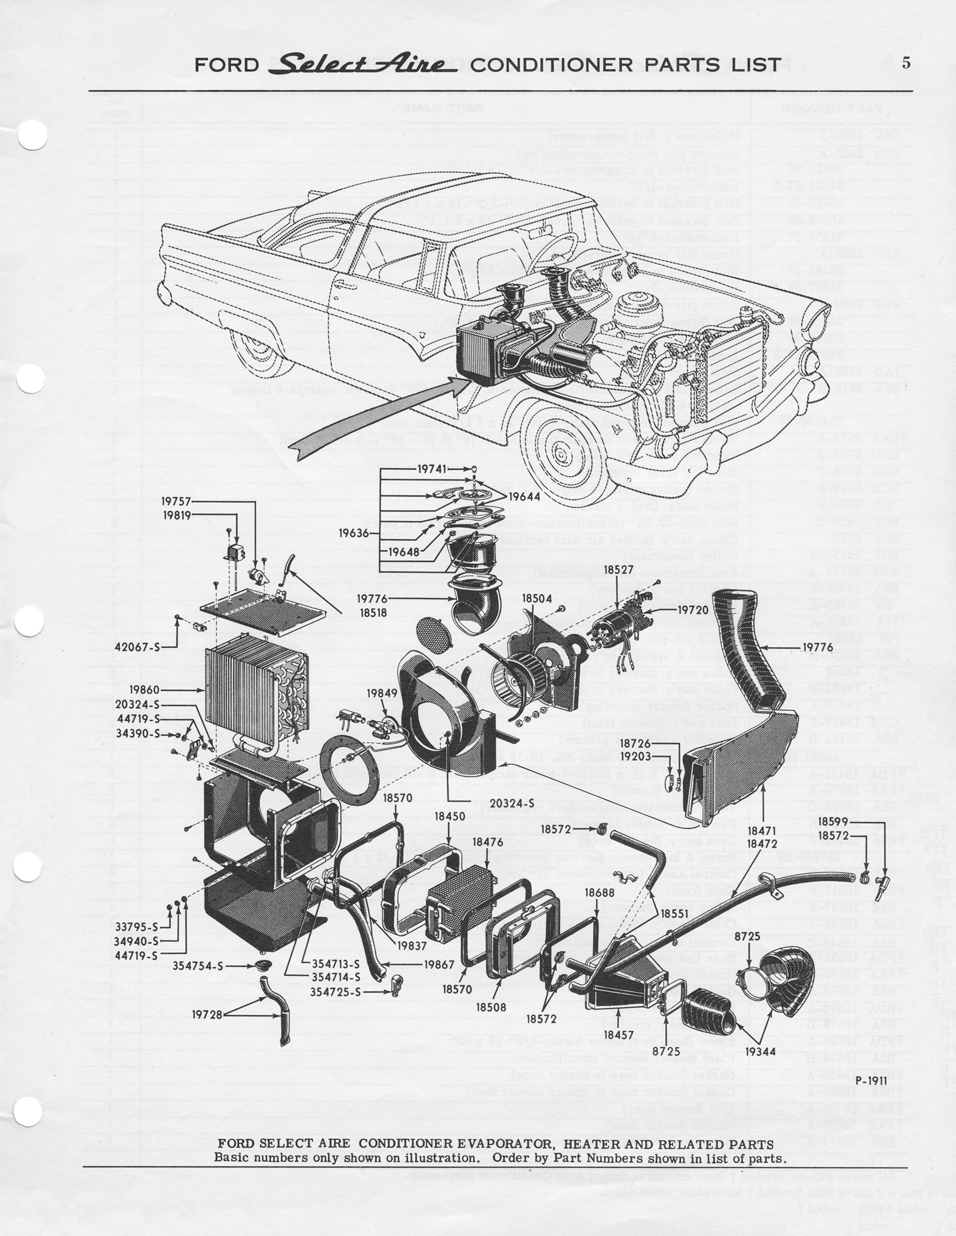 1955 Ford Car SelectAire Conditioner Parts List Page 5